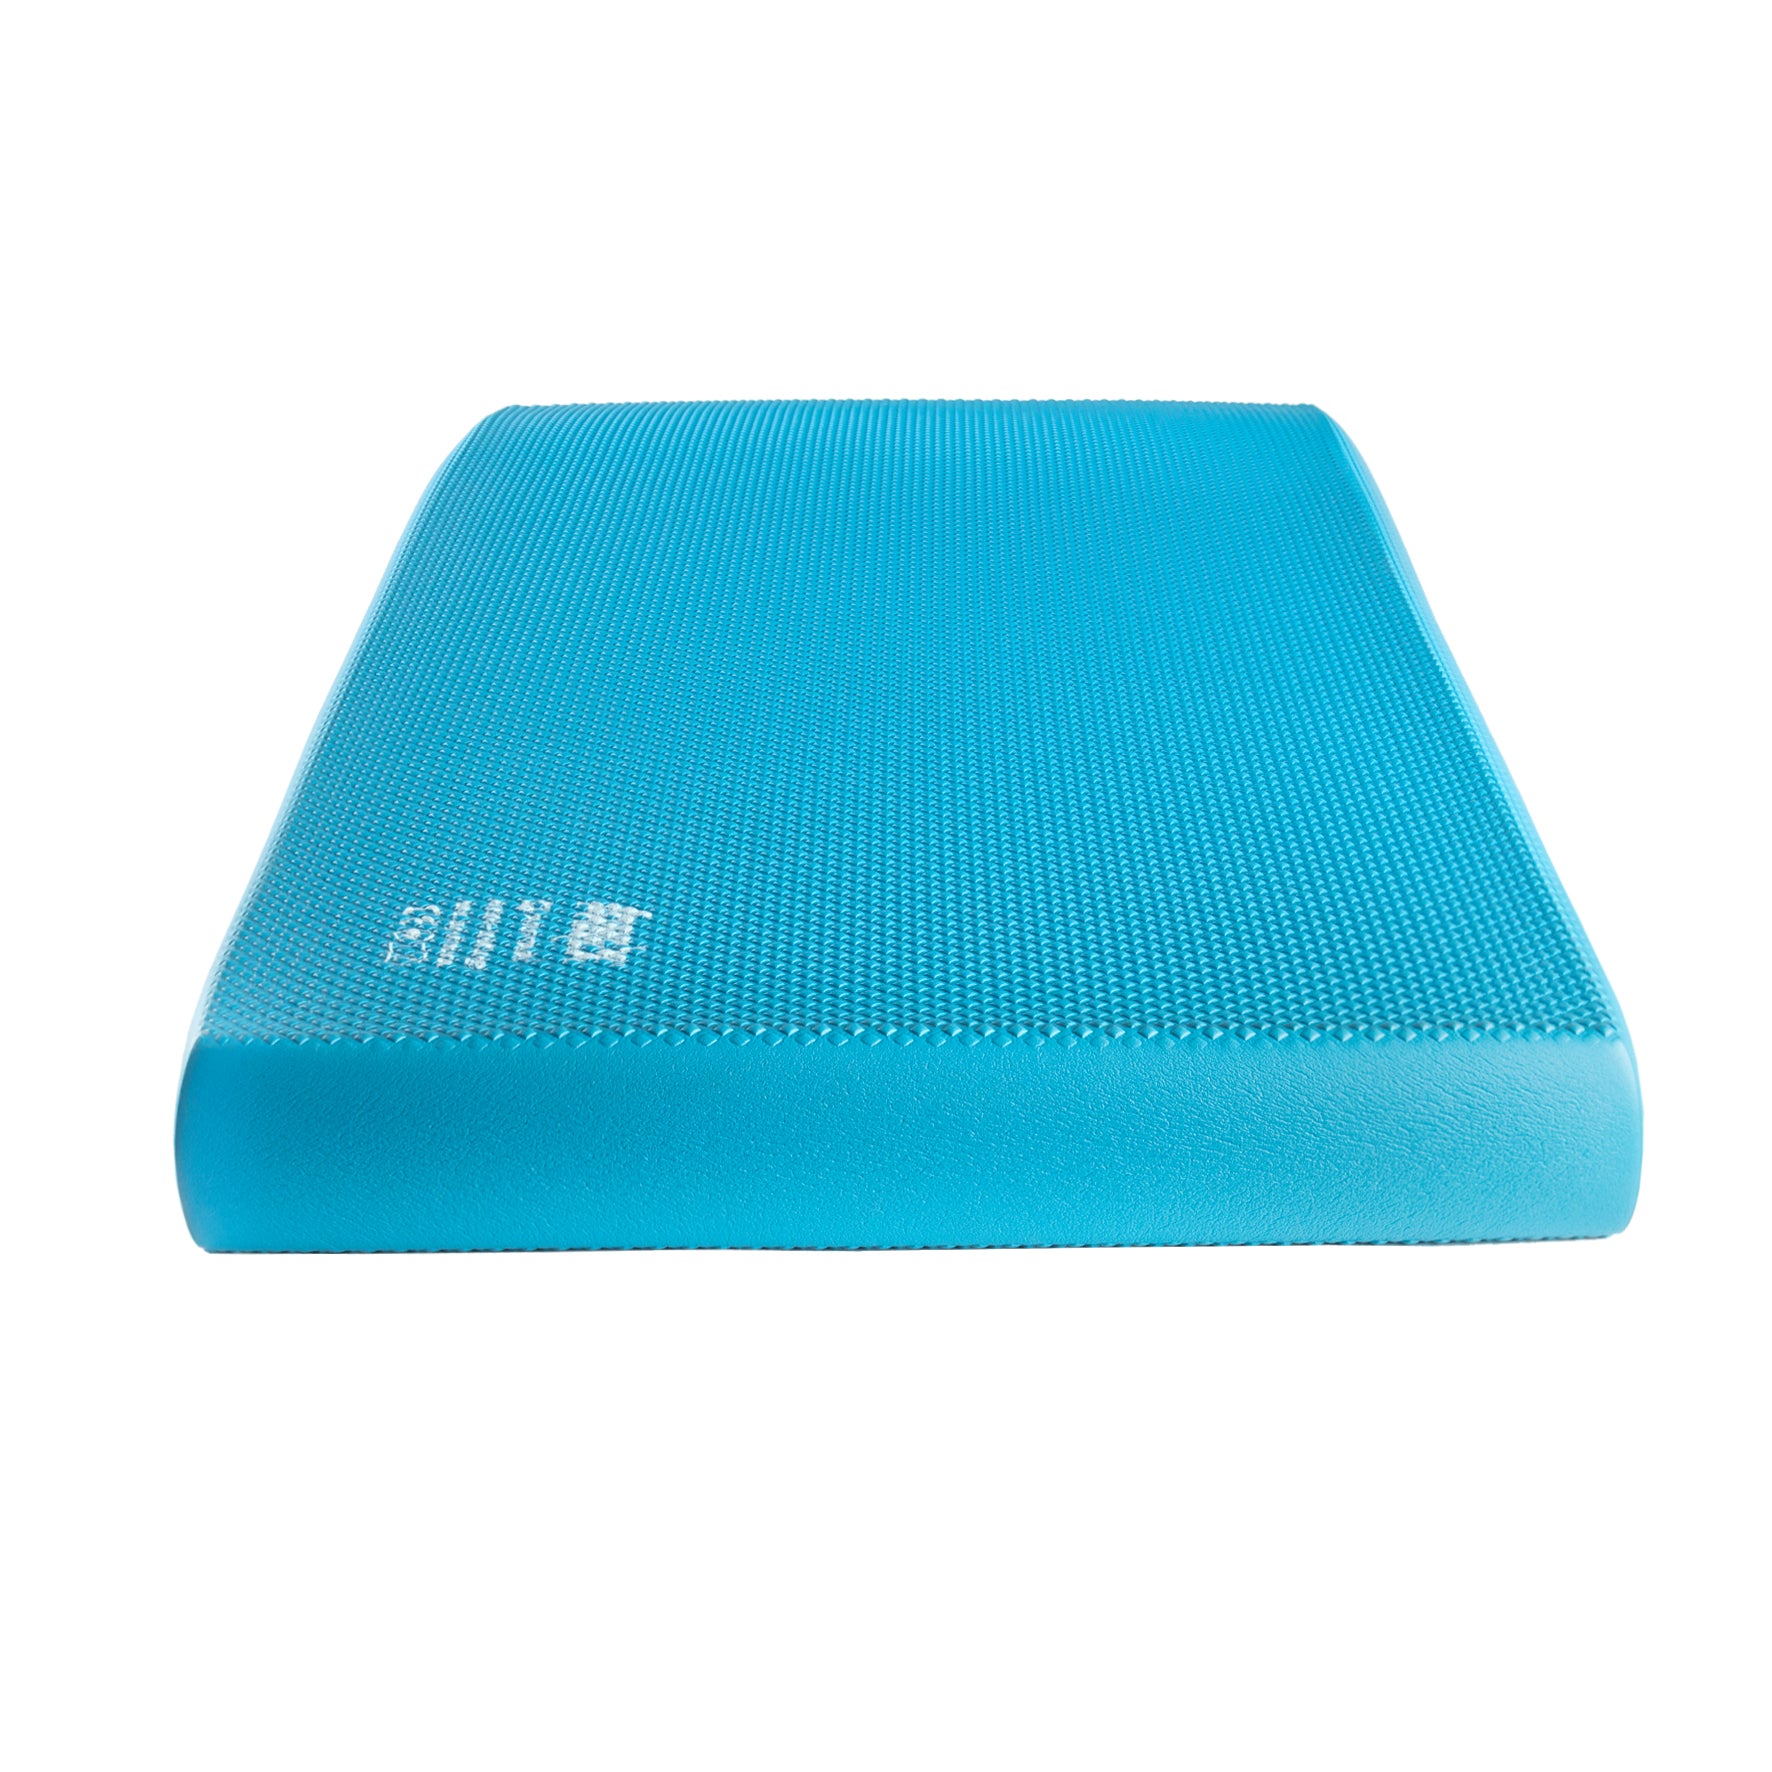 AIREX® Balance Pads - Regular or Elite – The Therapy Connection